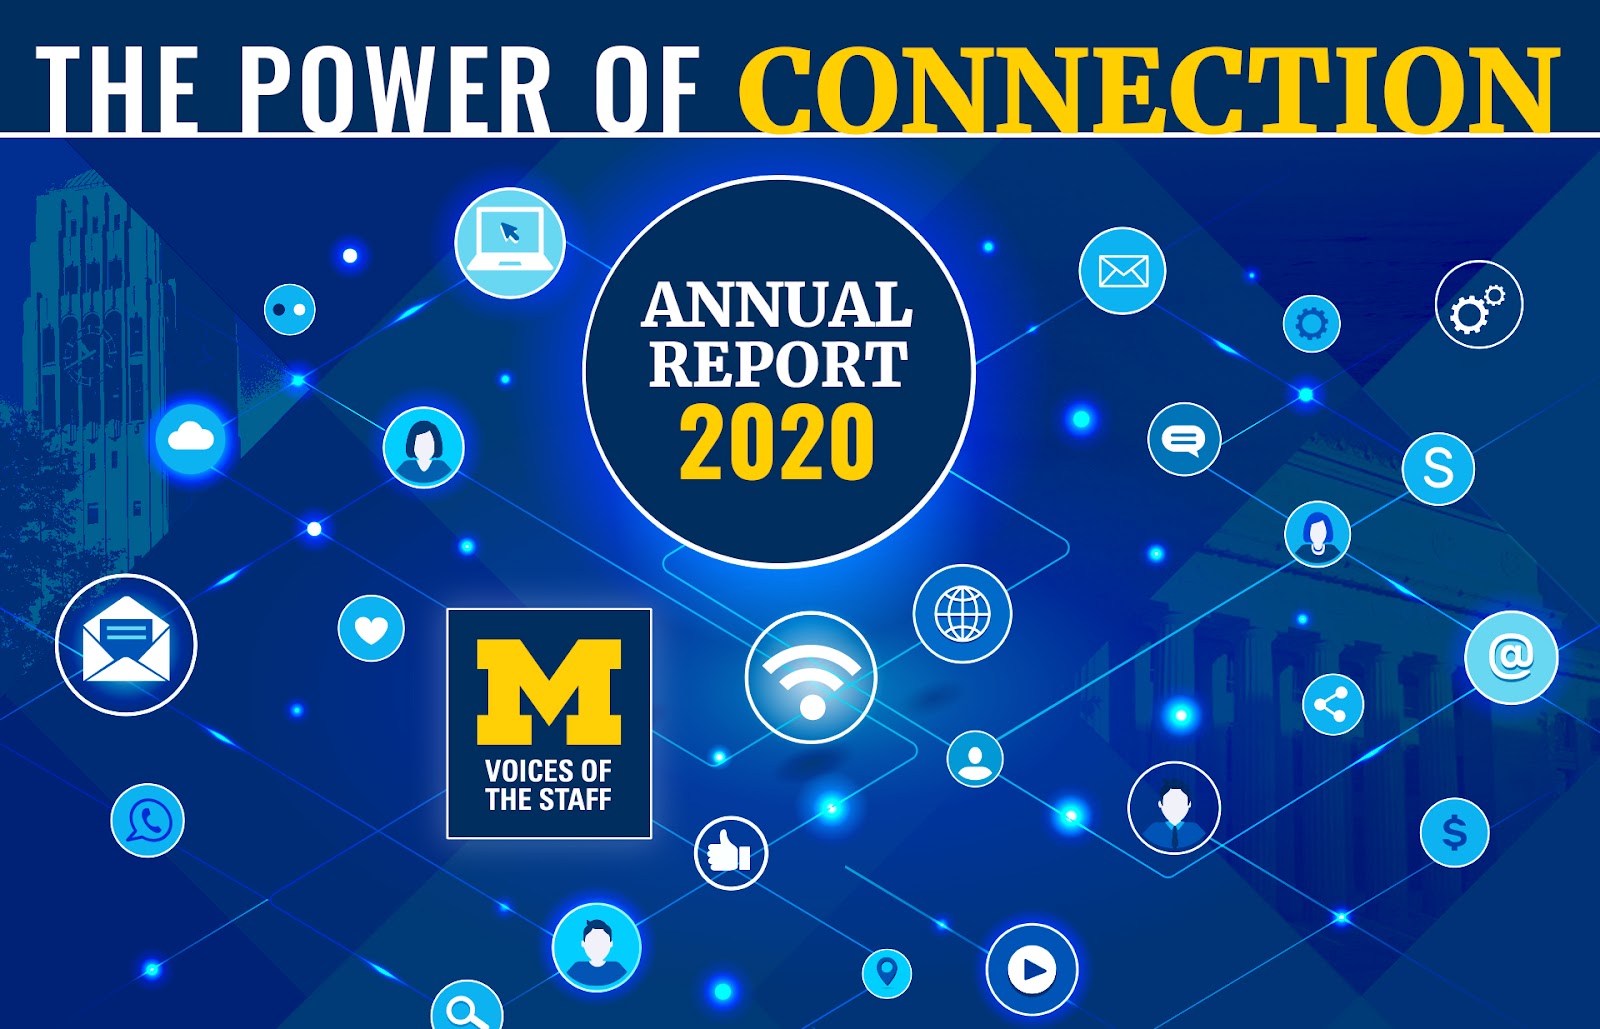 Blue Background with interconnected circles. One large circle in the middle with typography, “The Power of Connection” and the Voices of the Staff Logo